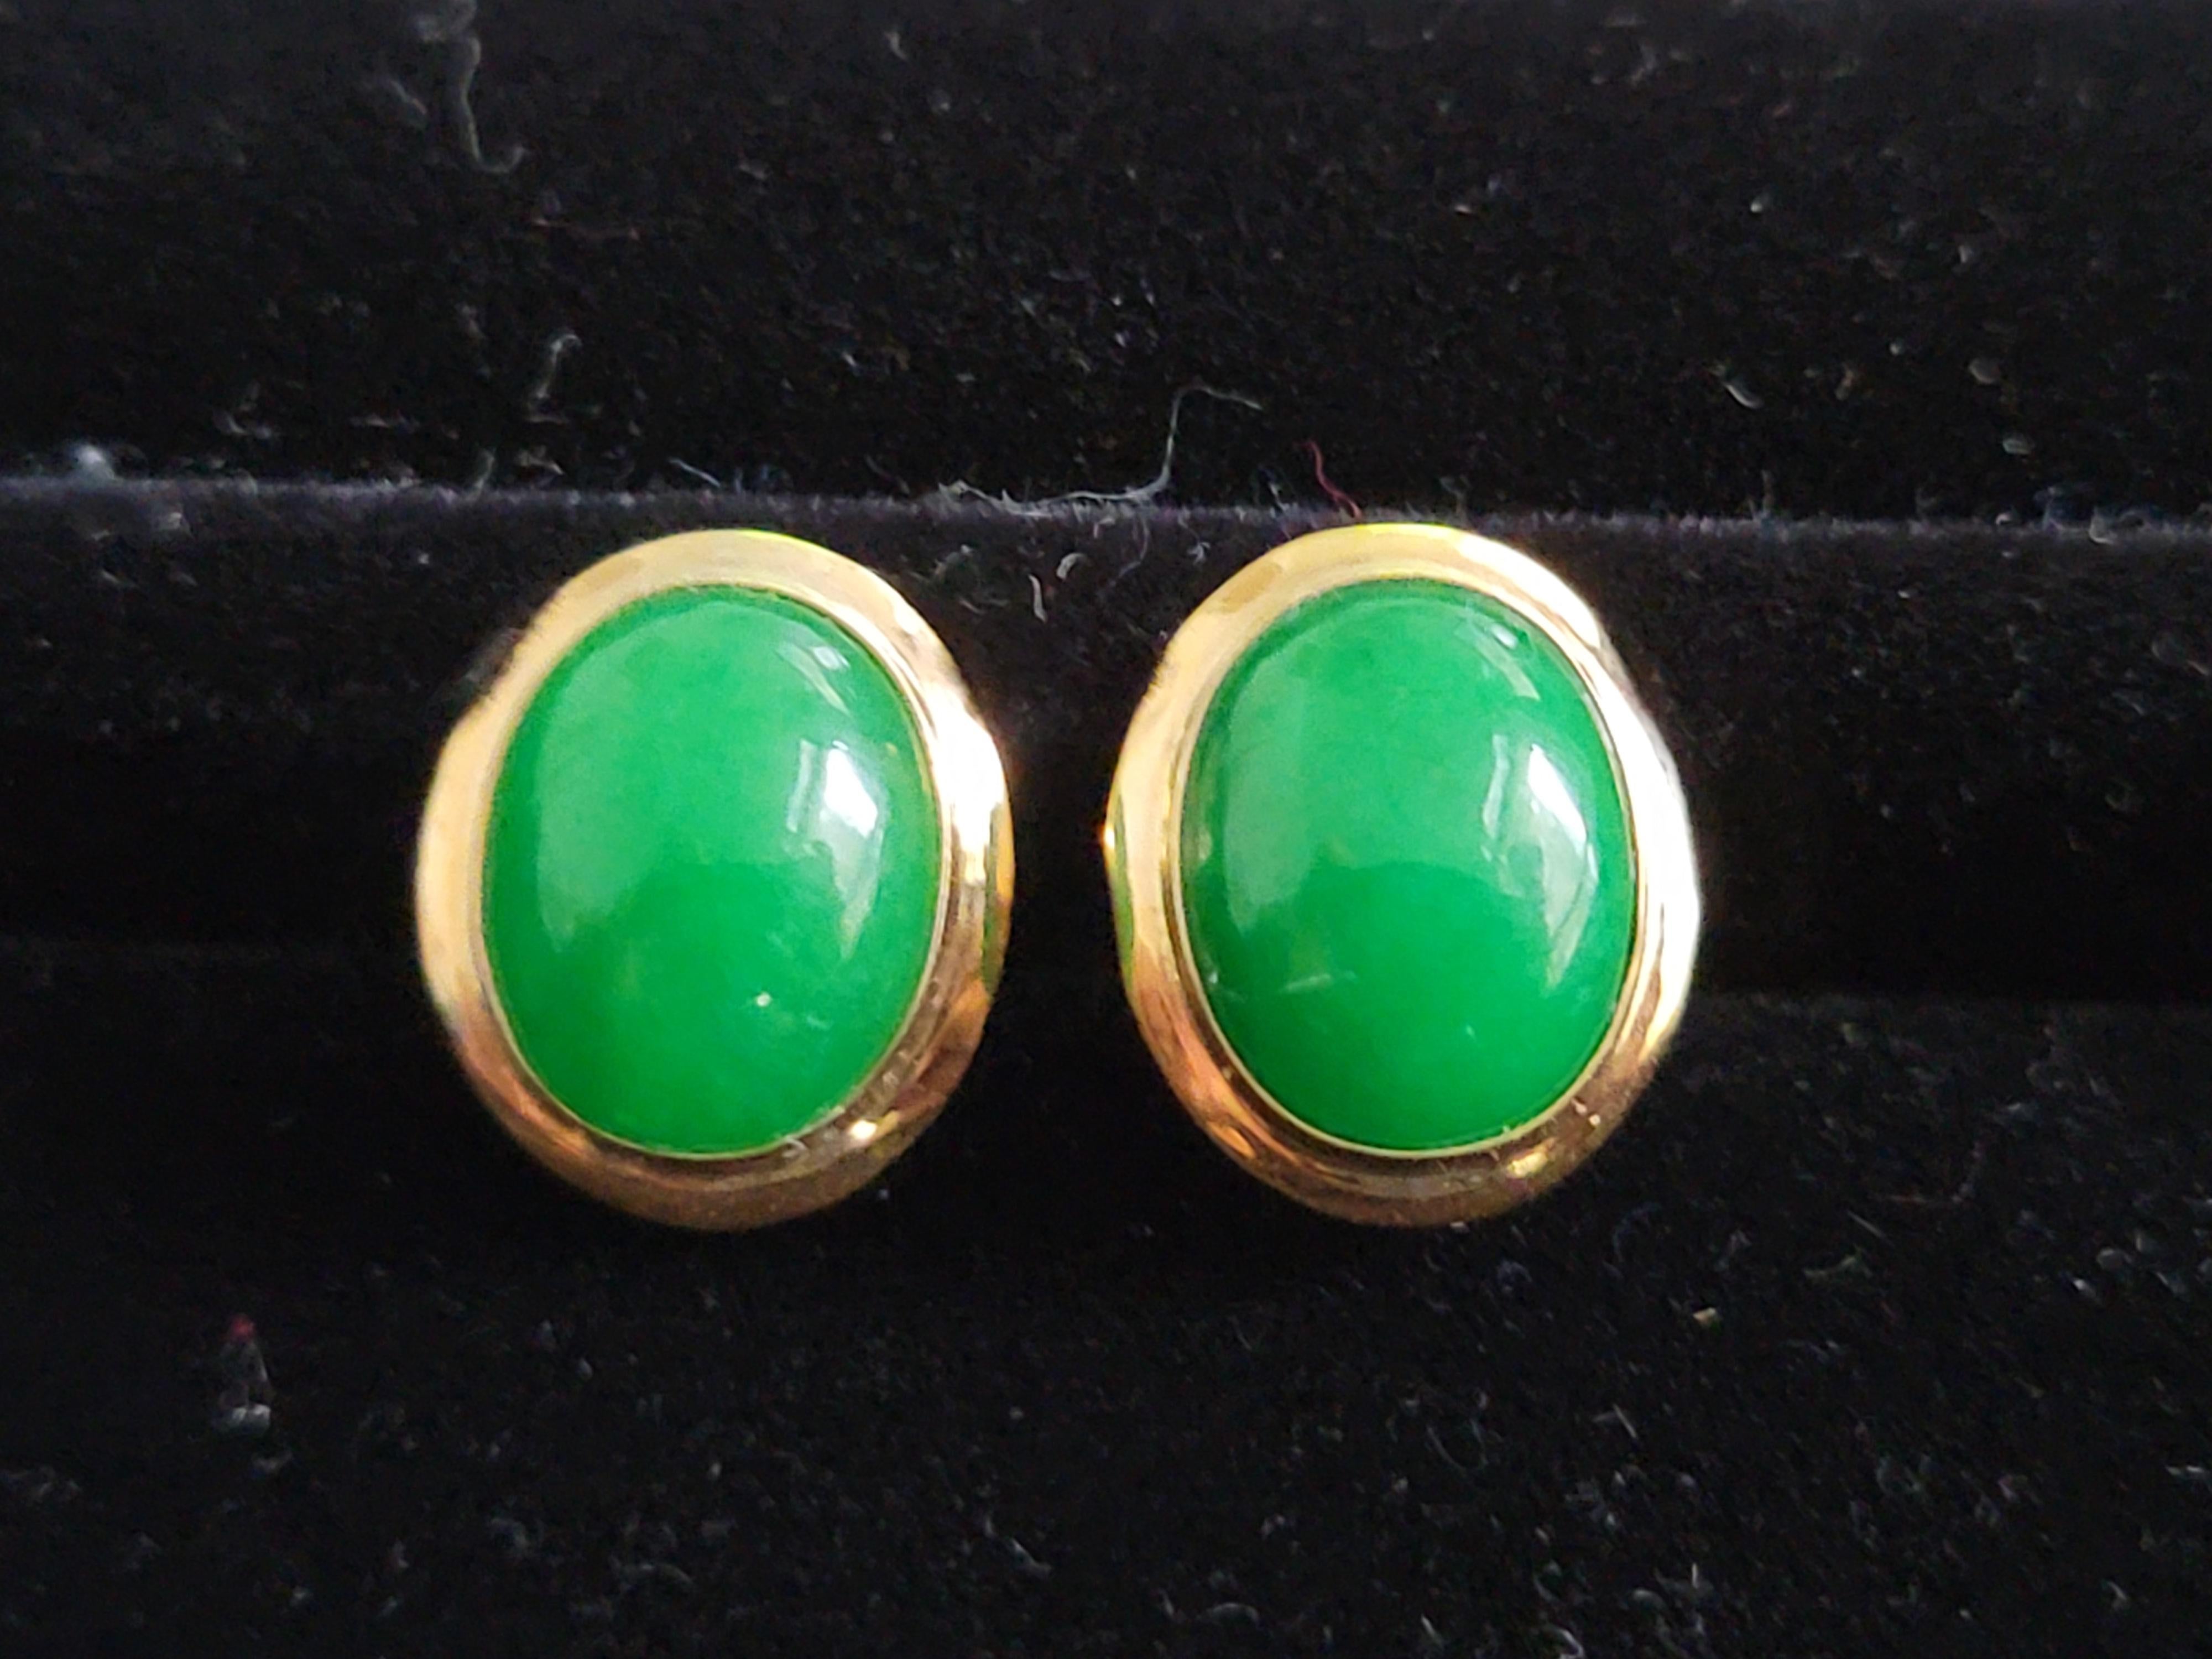 Qīng Zhong Green Jade Stud Earrings with solid 14K Yellow Gold For Sale 3